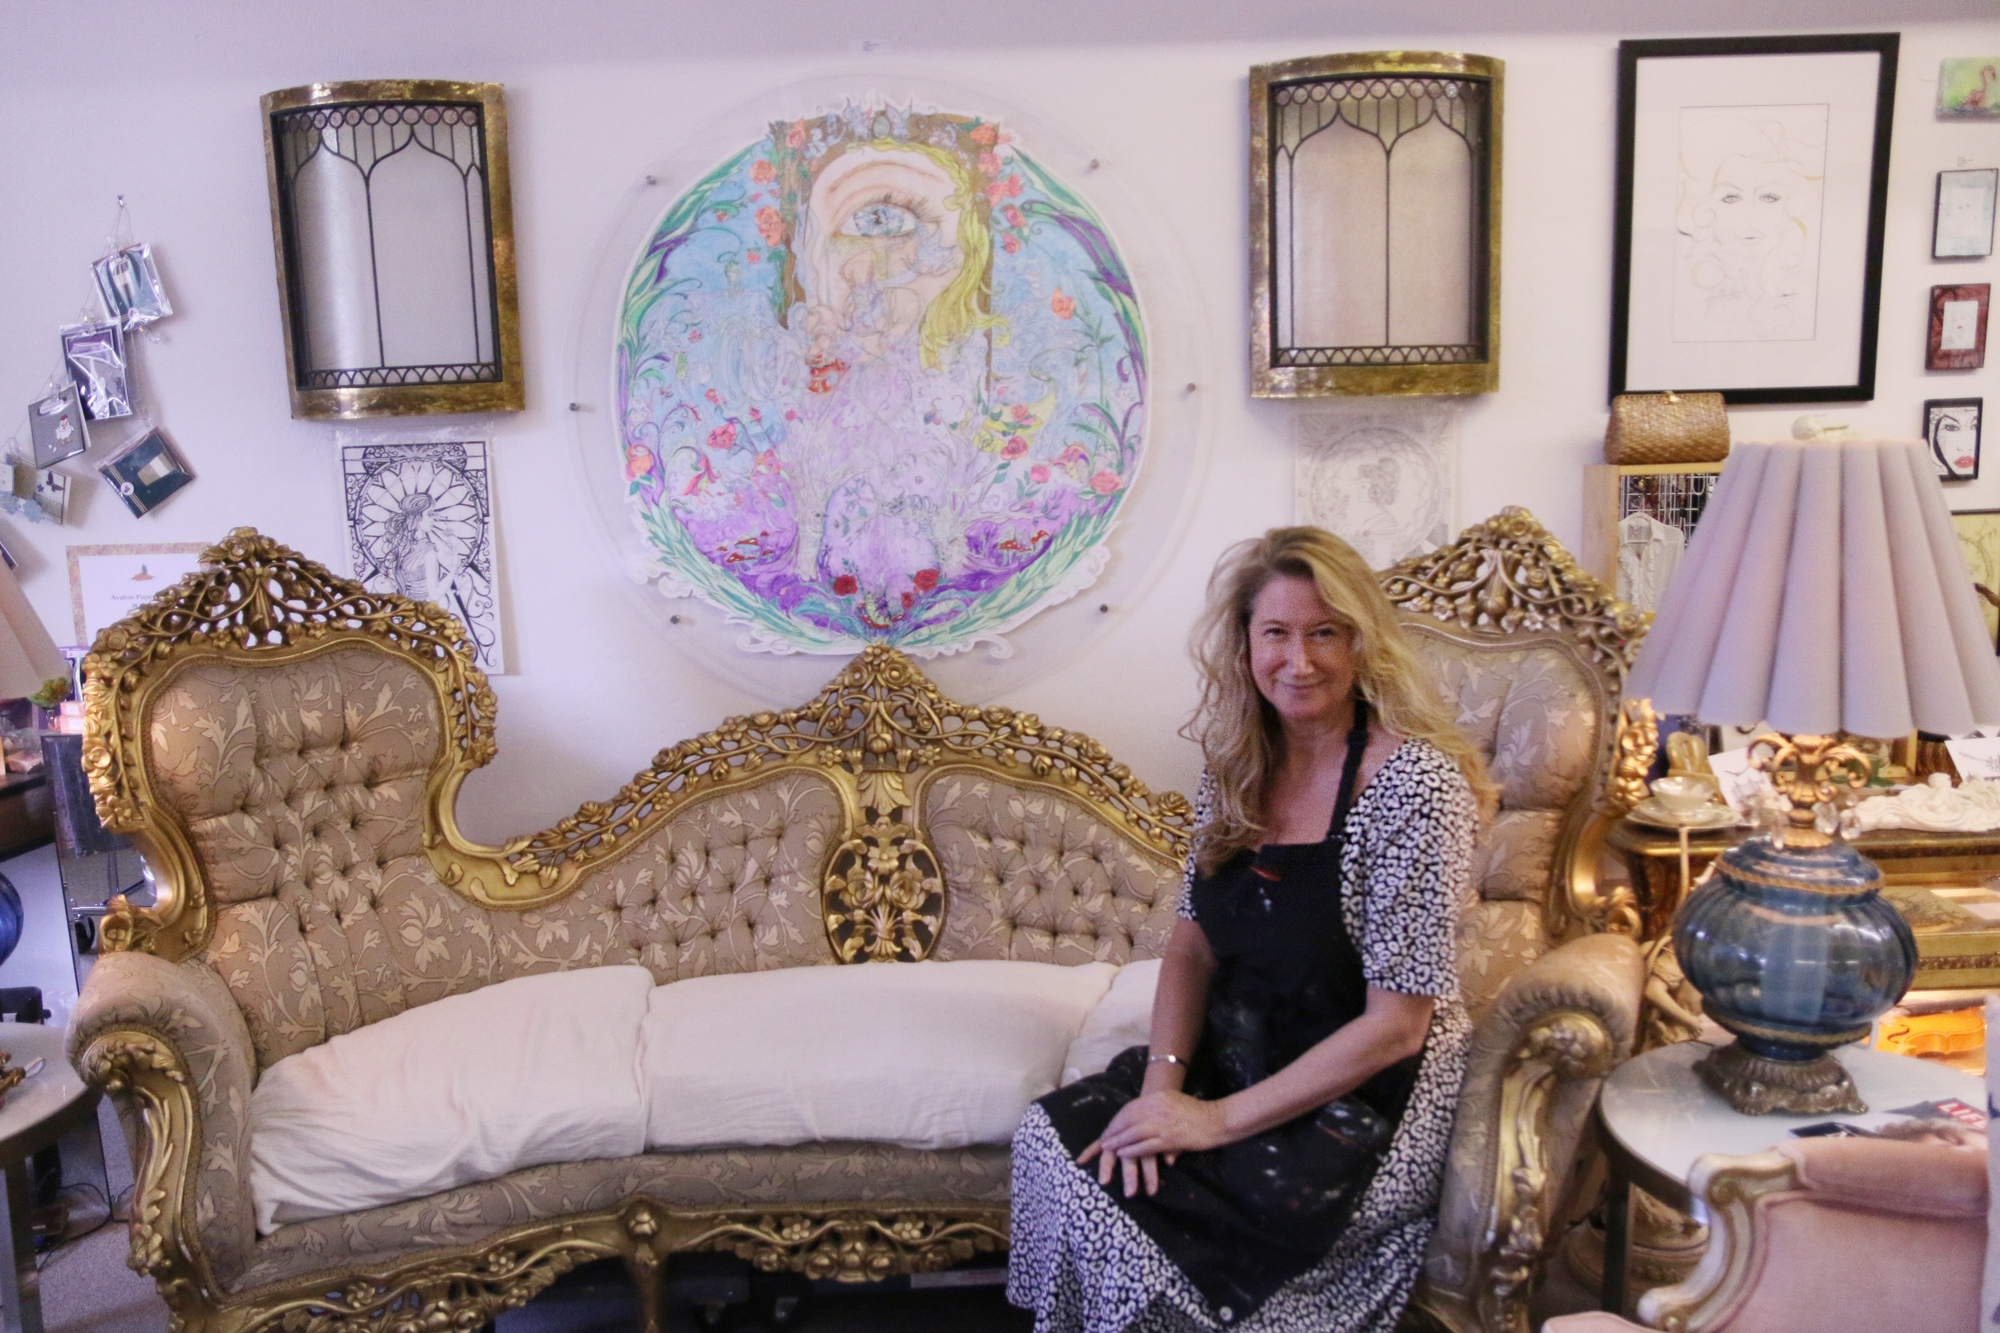 From vintage furniture to art on the walls, Angel Lowden hopes the community finds inspiration to be creative inside her new studio. Photo by Jarleene Almenas